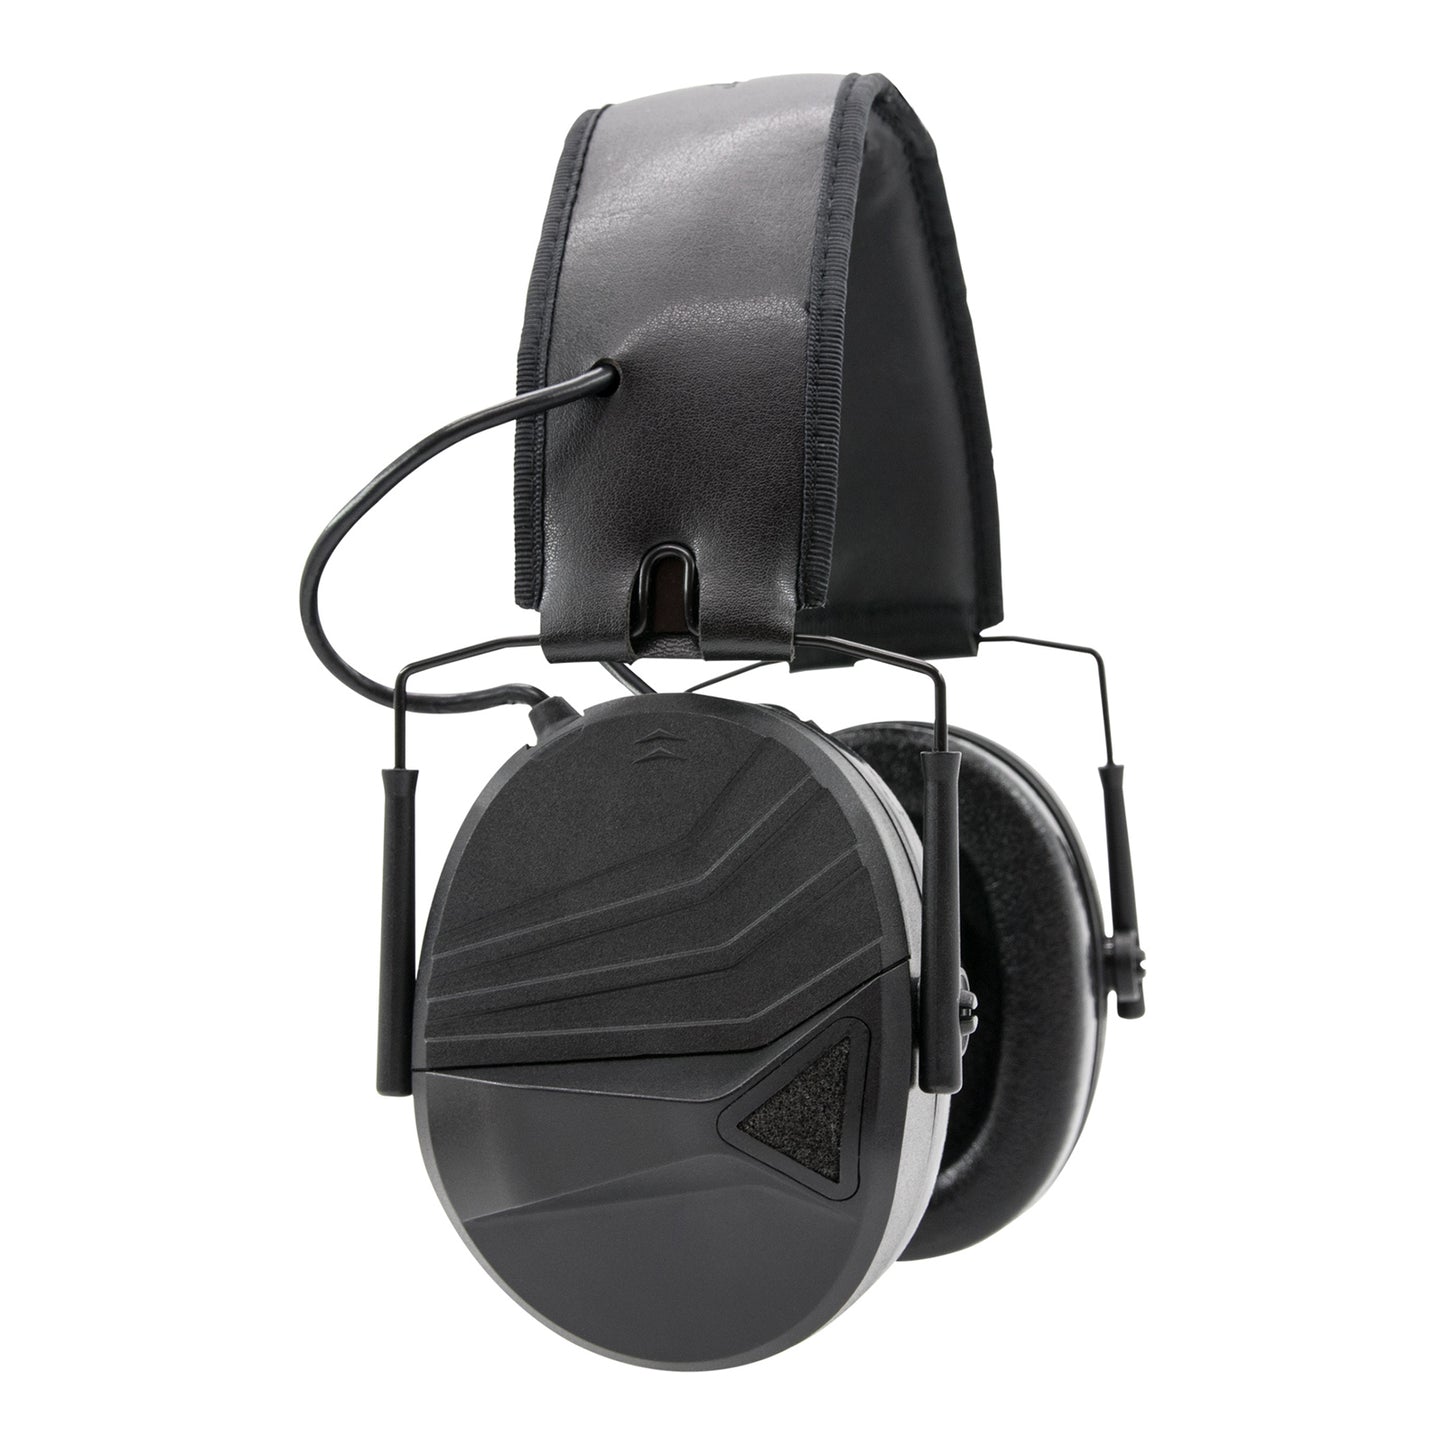 For training Electronic Hearing Protection Earmuffs With AUX input function